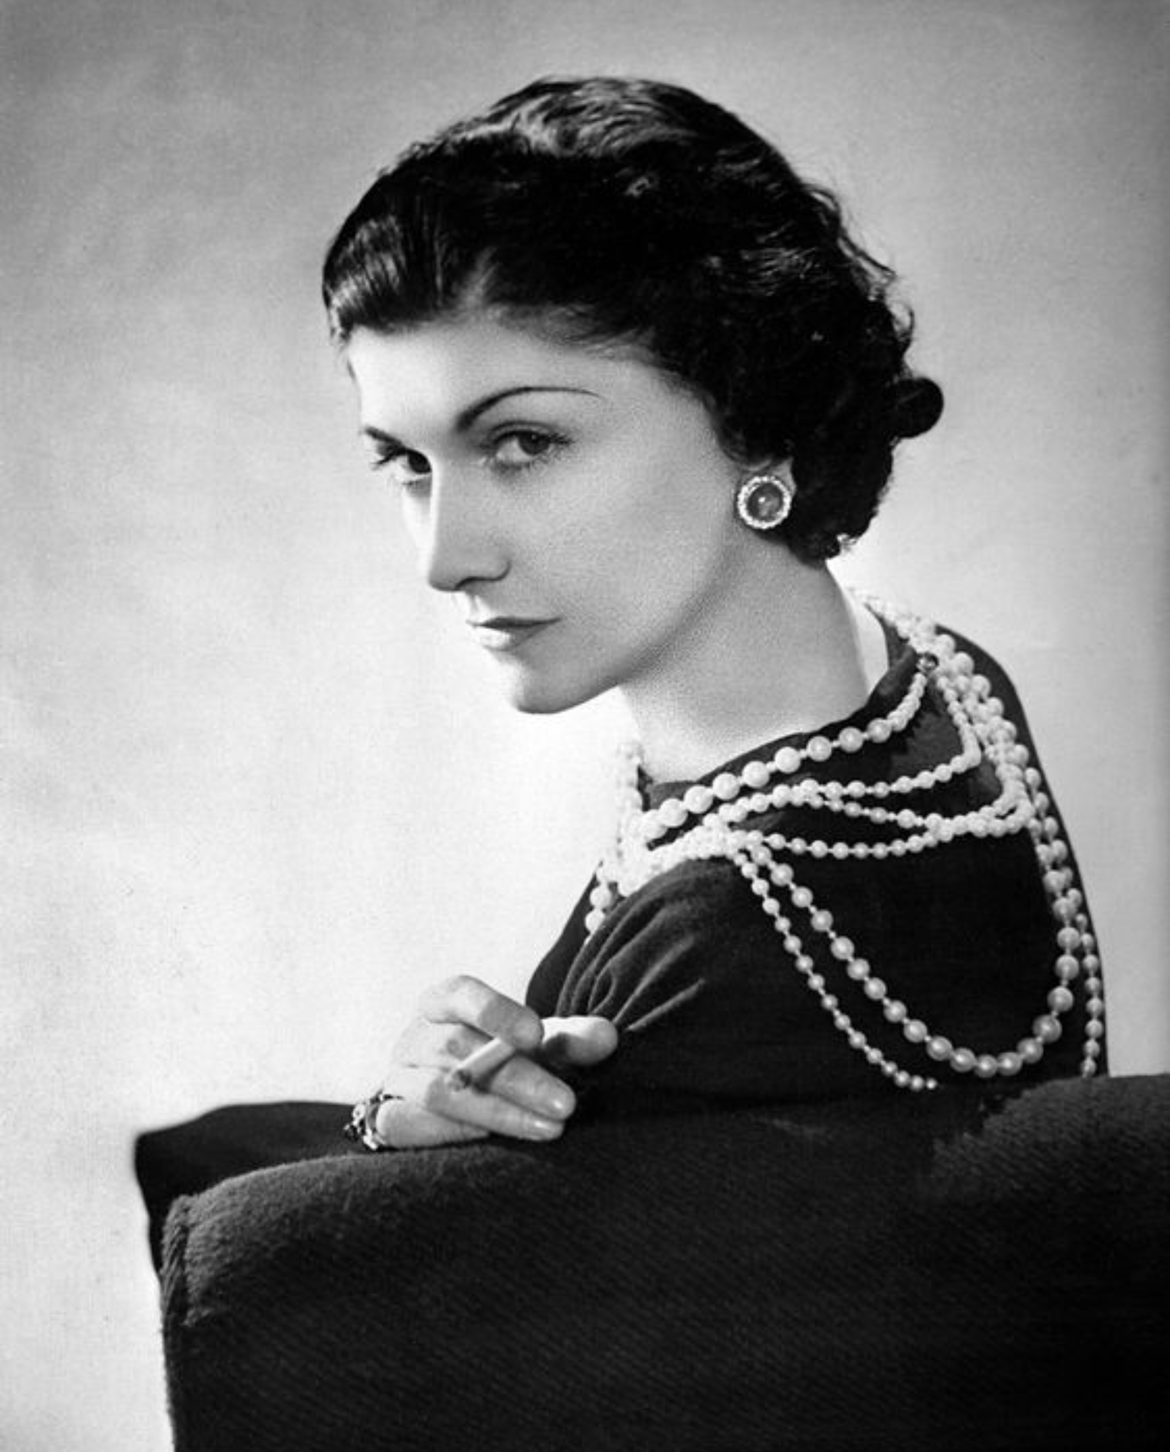 Coco Chanel - The Epitome of Elegance